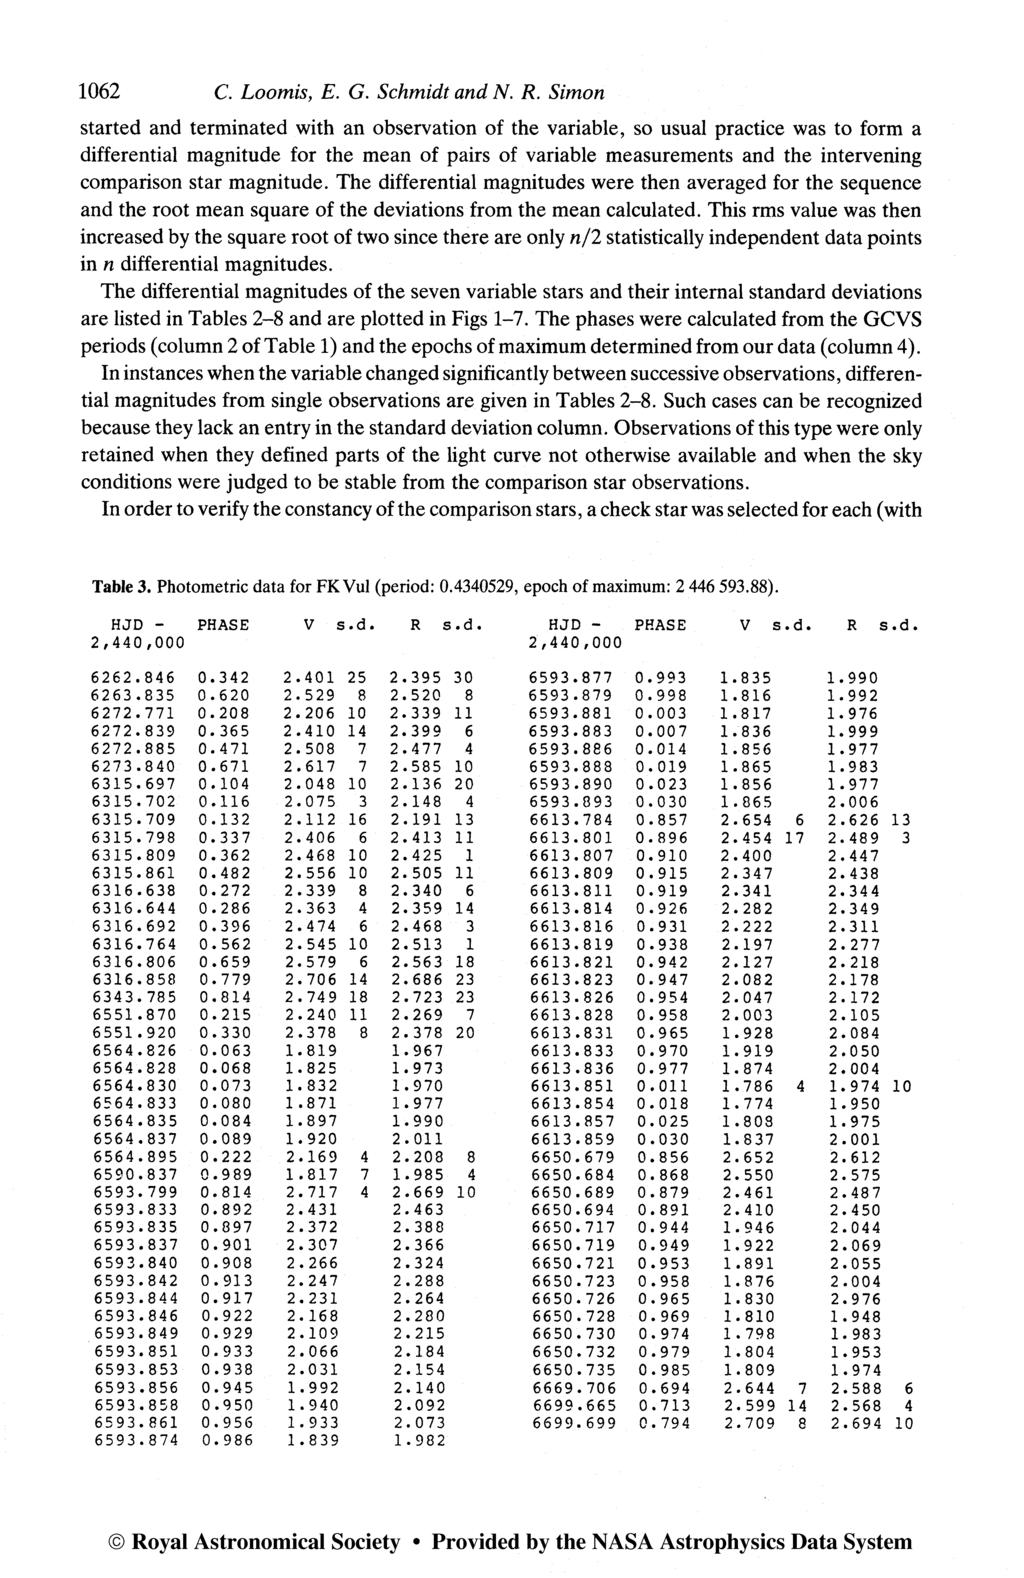 1988MNRAS235159L 162 C Loomis, E G Schmidt and N R Simon started and terminated with an observation of the variable, so usual practice was to form a differential magnitude for the mean of pairs of